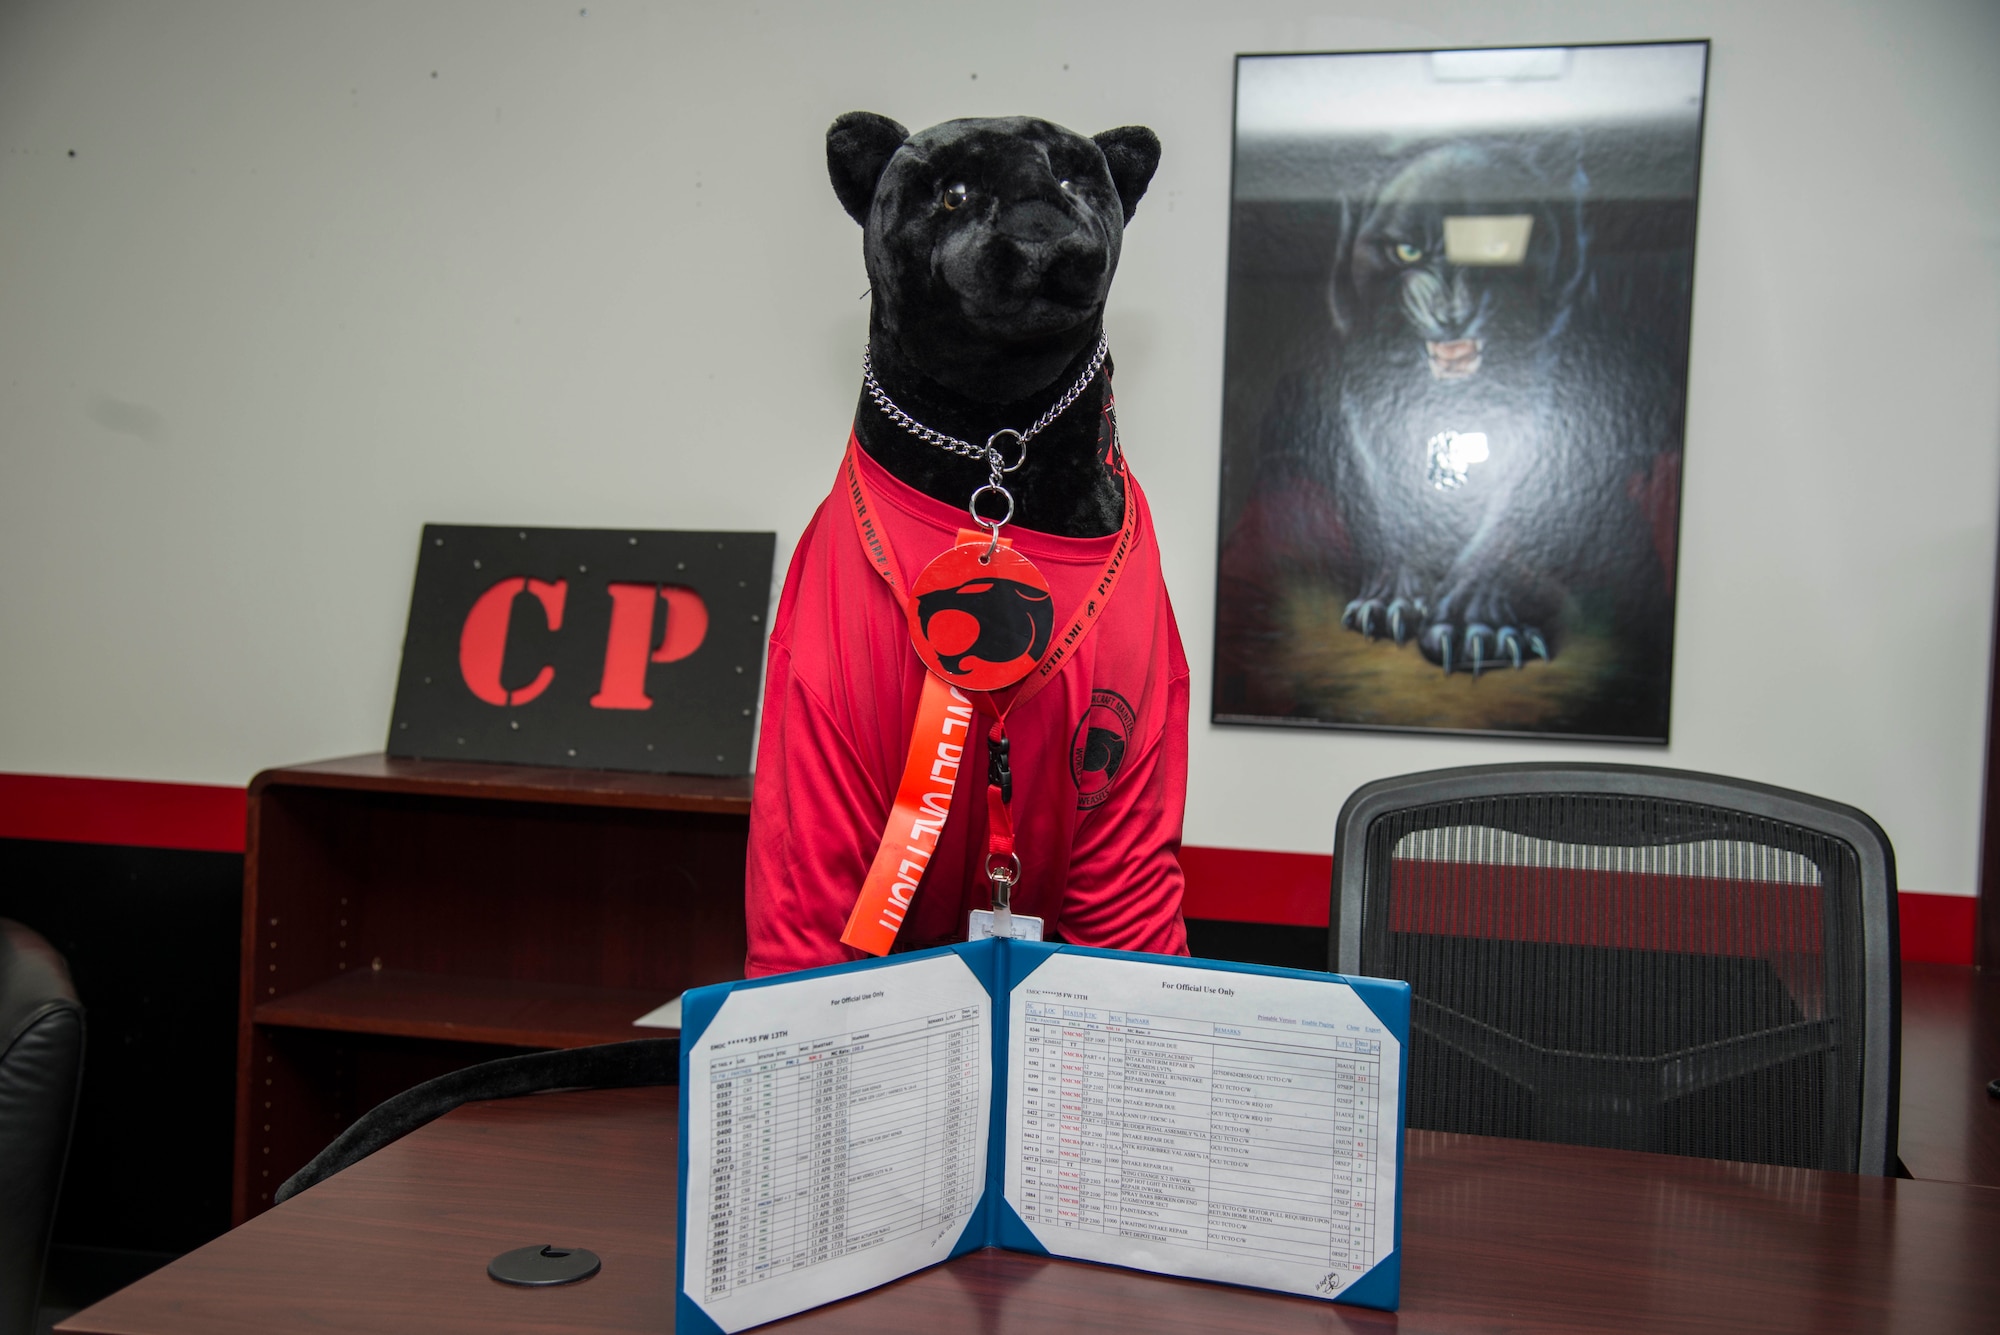 The 13th Aircraft Maintenance Squadron mascot, a panther, sits on a desk with papers showing all aircraft 100 percent mission capable at Misawa Air Base, Japan, April 20, 2017. The 13th AMXS work tirelessly to ensure all the 13th Fighter Squadron's F-16 Fighting Falcons are operationally capable of answering the call. (U.S. Air Force photo by Senior Airman Brittany A. Chase)